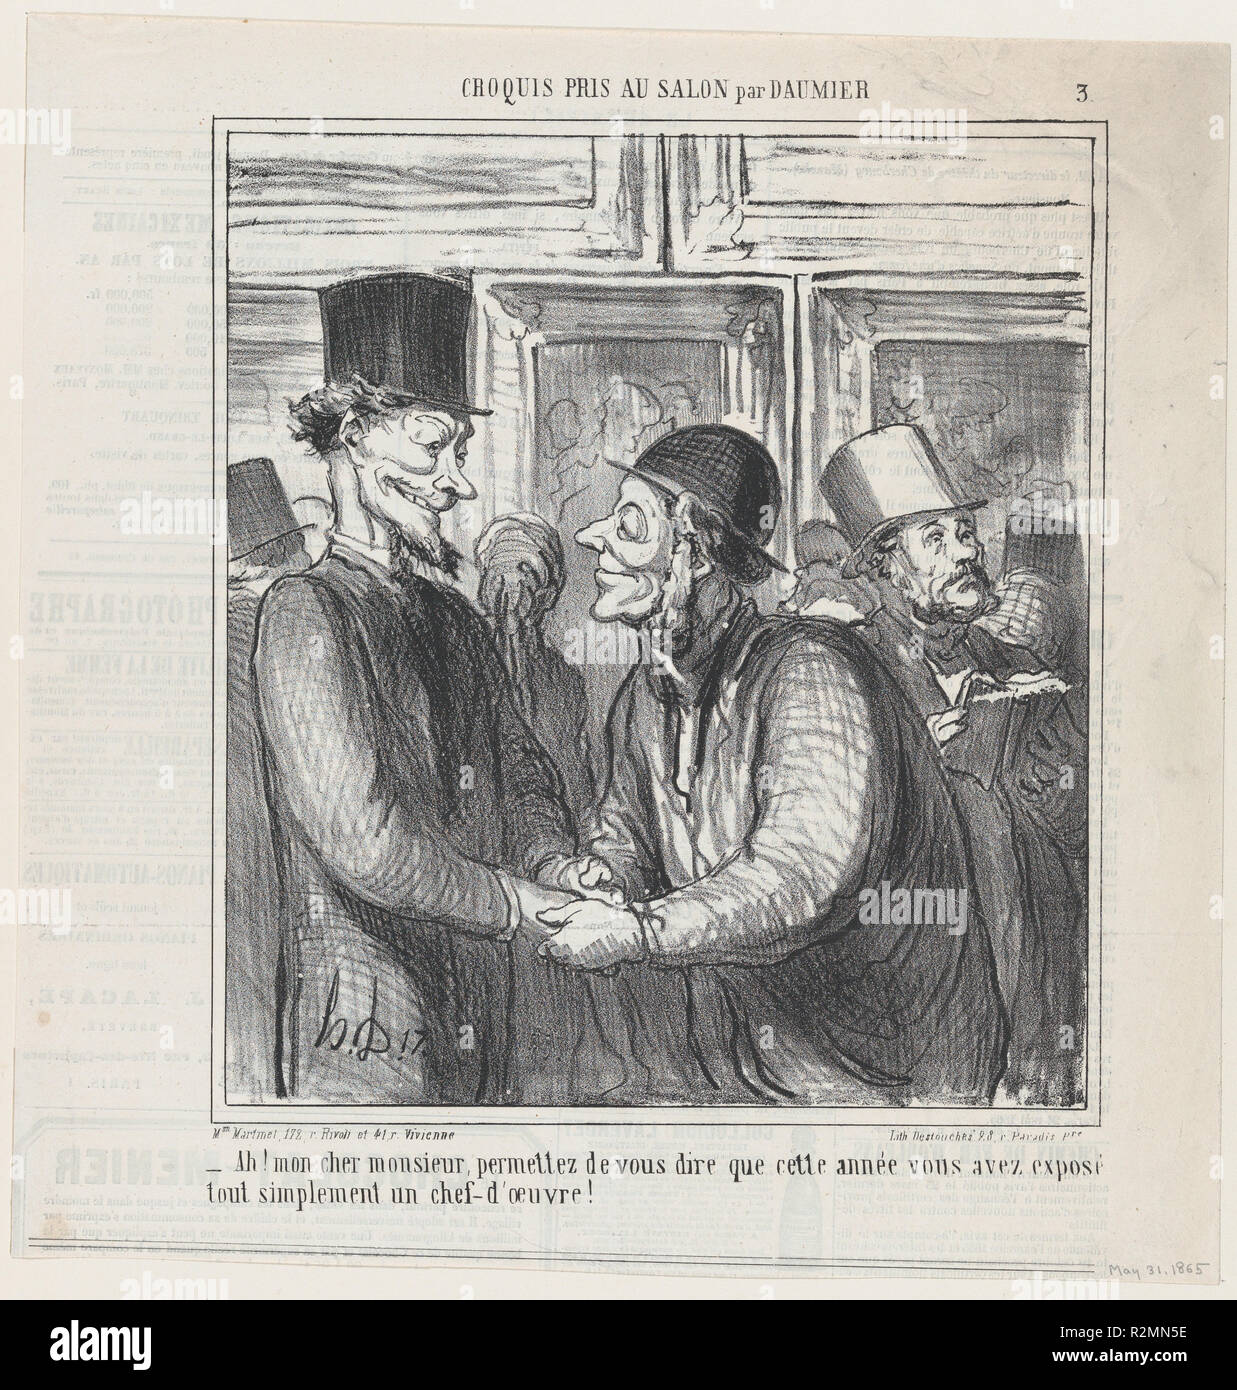 Ah, my dear sir, allow me to tell you that this year you have quite simply exhibited a masterpiece, from 'Sketches from the Salon,' published in Le Charivari, May 31, 1865. Artist: Honoré Daumier (French, Marseilles 1808-1879 Valmondois). Dimensions: Image: 9 3/16 × 8 3/16 in. (23.4 × 20.8 cm)  Sheet: 11 13/16 × 11 7/16 in. (30 × 29.1 cm). Printer: Destouches (Paris). Publisher: Aaron Martinet (French, 1762-1841). Series/Portfolio: 'Sketches from the Salon' (Croquis pris au Salon). Date: May 31, 1865. Museum: Metropolitan Museum of Art, New York, USA. Stock Photo